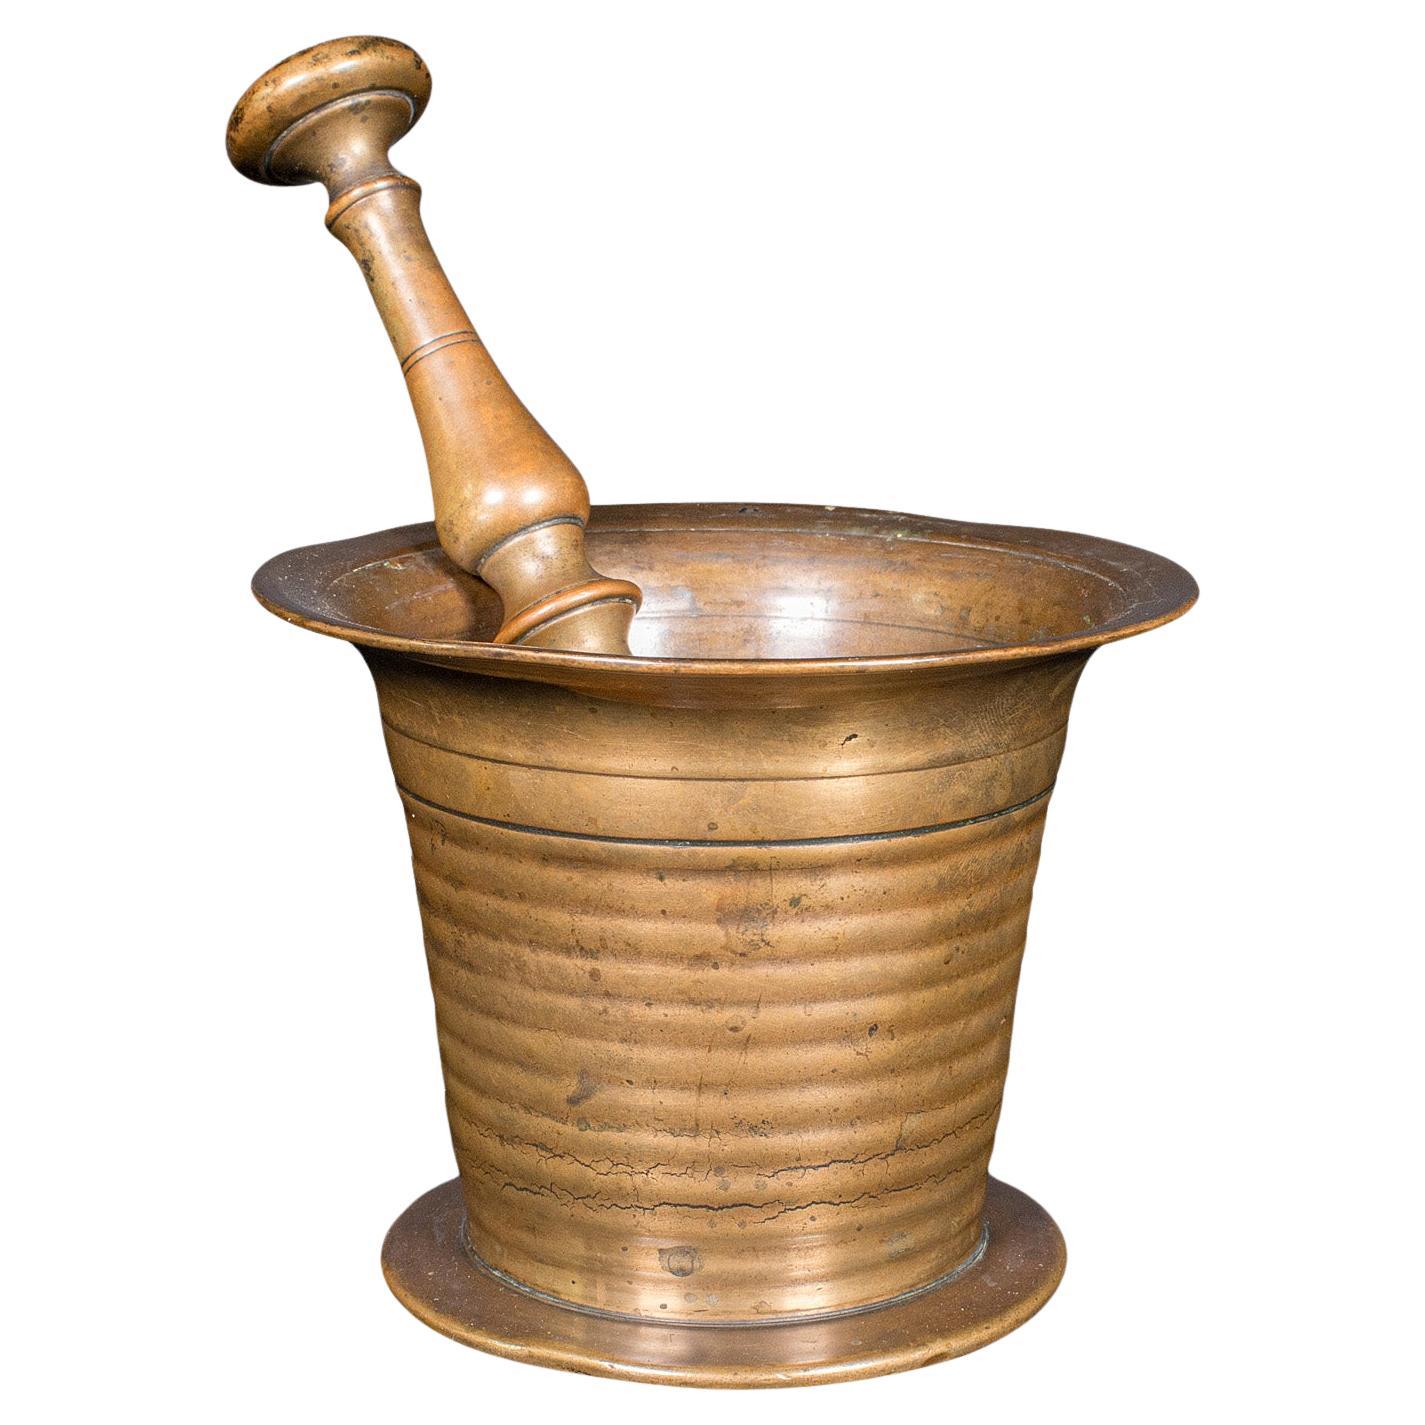 Antique Mortar And Pestle, English, Brass Apothecary Instrument, Victorian, 1850